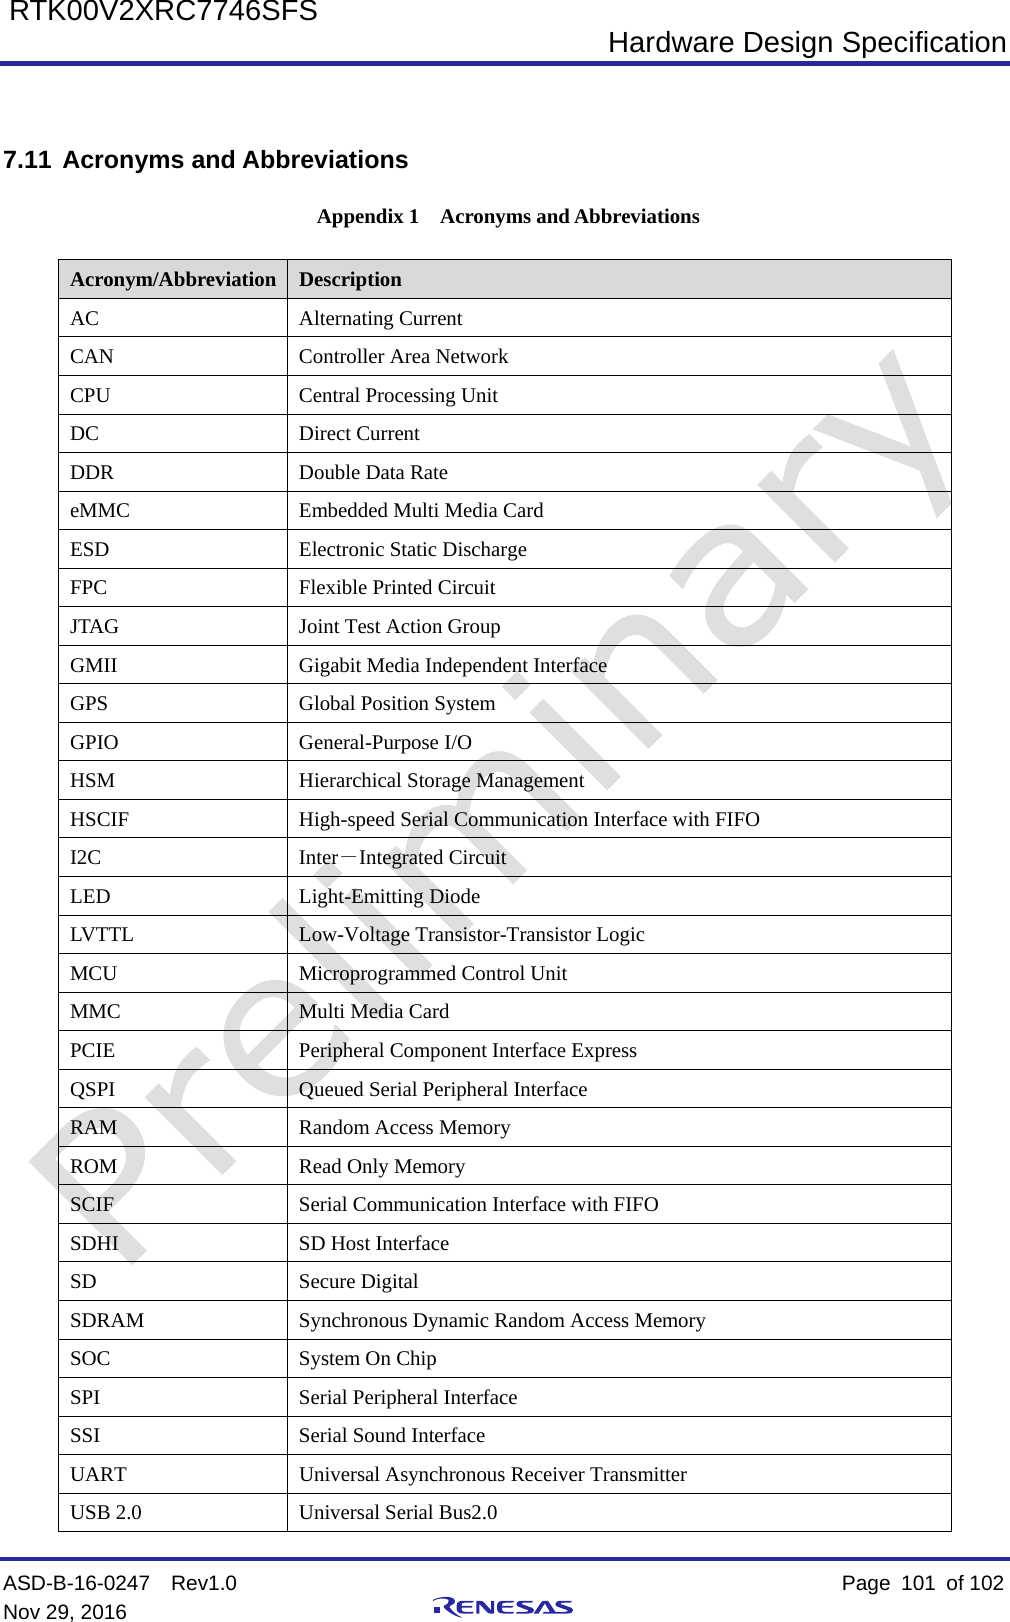  Hardware Design Specification ASD-B-16-0247  Rev1.0    Page  101 of 102 Nov 29, 2016     RTK00V2XRC7746SFS  7.11 Acronyms and Abbreviations Appendix 1  Acronyms and Abbreviations Acronym/Abbreviation Description AC Alternating Current CAN Controller Area Network CPU Central Processing Unit DC Direct Current DDR Double Data Rate eMMC Embedded Multi Media Card ESD  Electronic Static Discharge FPC Flexible Printed Circuit JTAG Joint Test Action Group GMII Gigabit Media Independent Interface GPS Global Position System GPIO General-Purpose I/O HSM Hierarchical Storage Management HSCIF High-speed Serial Communication Interface with FIFO I2C Inter－Integrated Circuit LED  Light-Emitting Diode LVTTL  Low-Voltage Transistor-Transistor Logic MCU Microprogrammed Control Unit MMC Multi Media Card PCIE Peripheral Component Interface Express QSPI Queued Serial Peripheral Interface RAM Random Access Memory ROM  Read Only Memory SCIF Serial Communication Interface with FIFO SDHI SD Host Interface SD Secure Digital SDRAM Synchronous Dynamic Random Access Memory SOC System On Chip SPI Serial Peripheral Interface SSI Serial Sound Interface UART Universal Asynchronous Receiver Transmitter USB 2.0 Universal Serial Bus2.0 